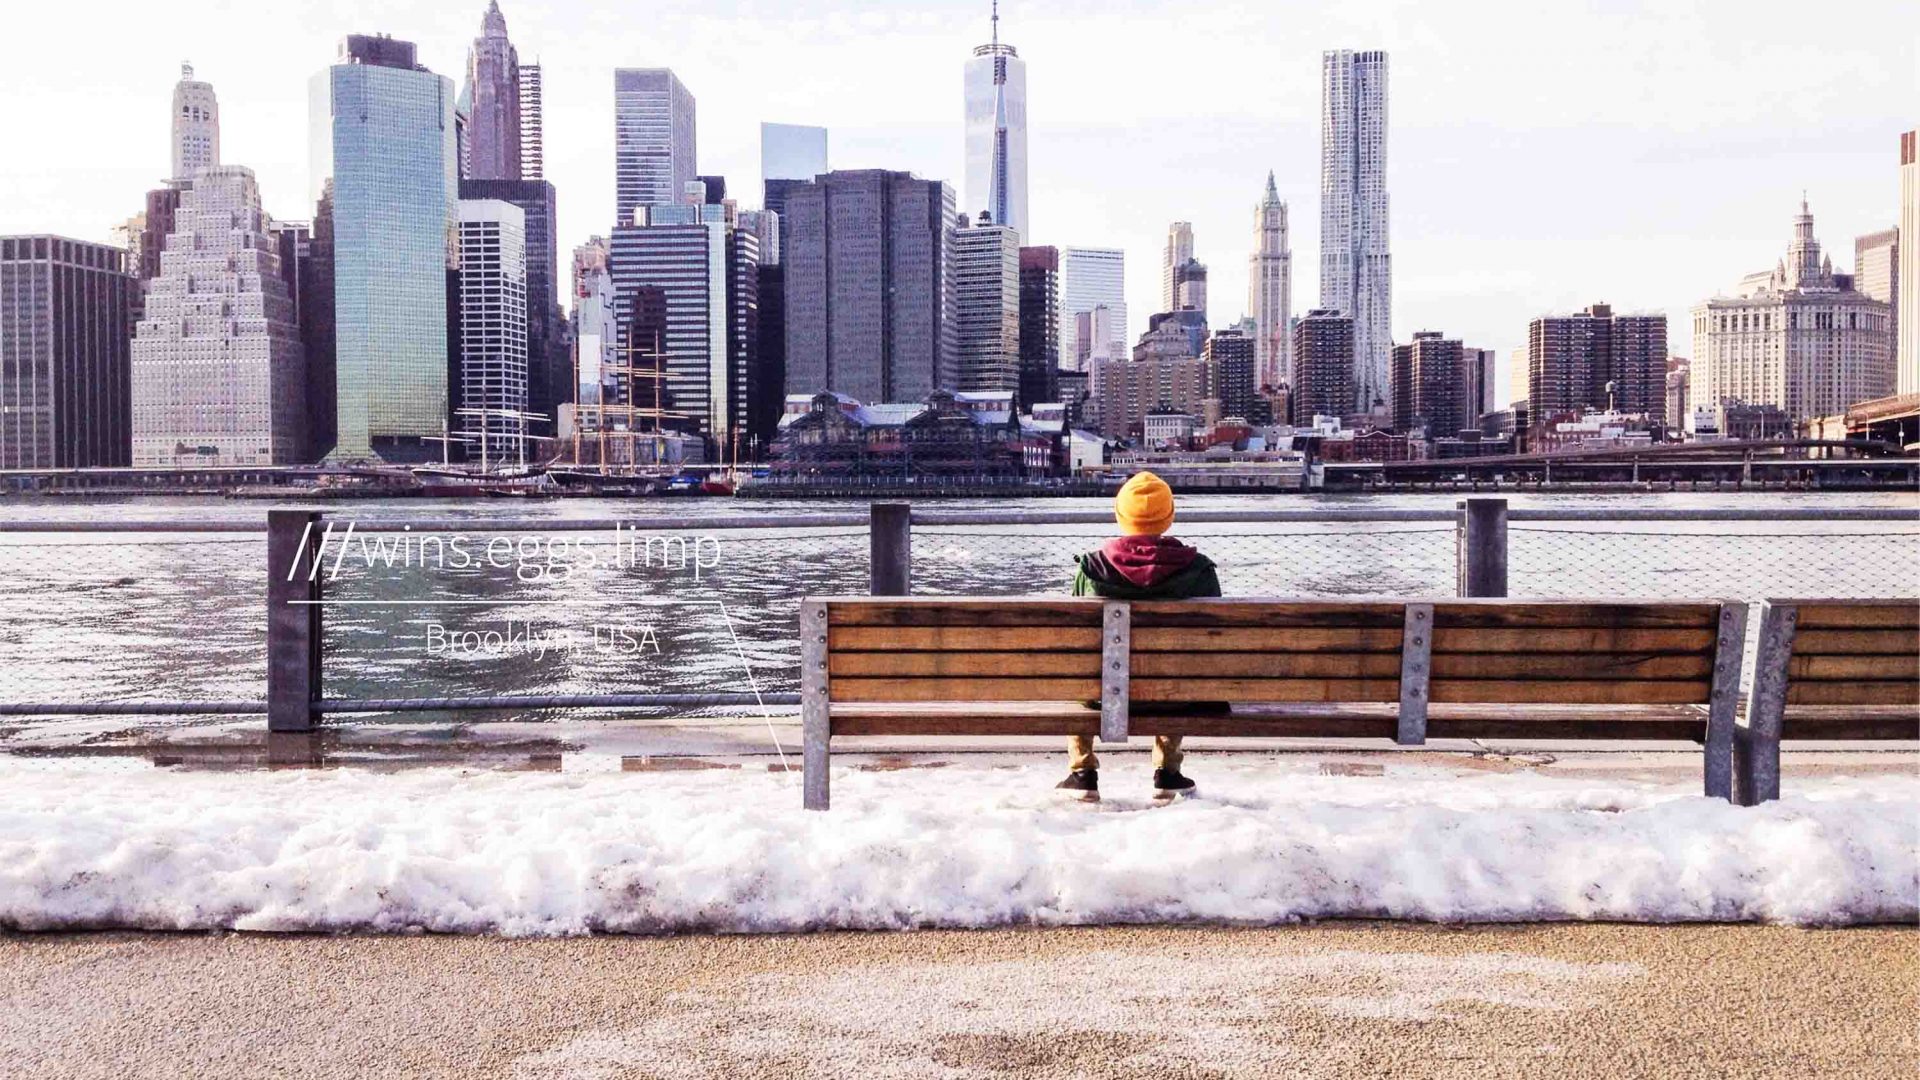 what3words system works globally. Here, it generates a three-word addresses for the spot where this person sits to look at the Manhattan skyline in New York.